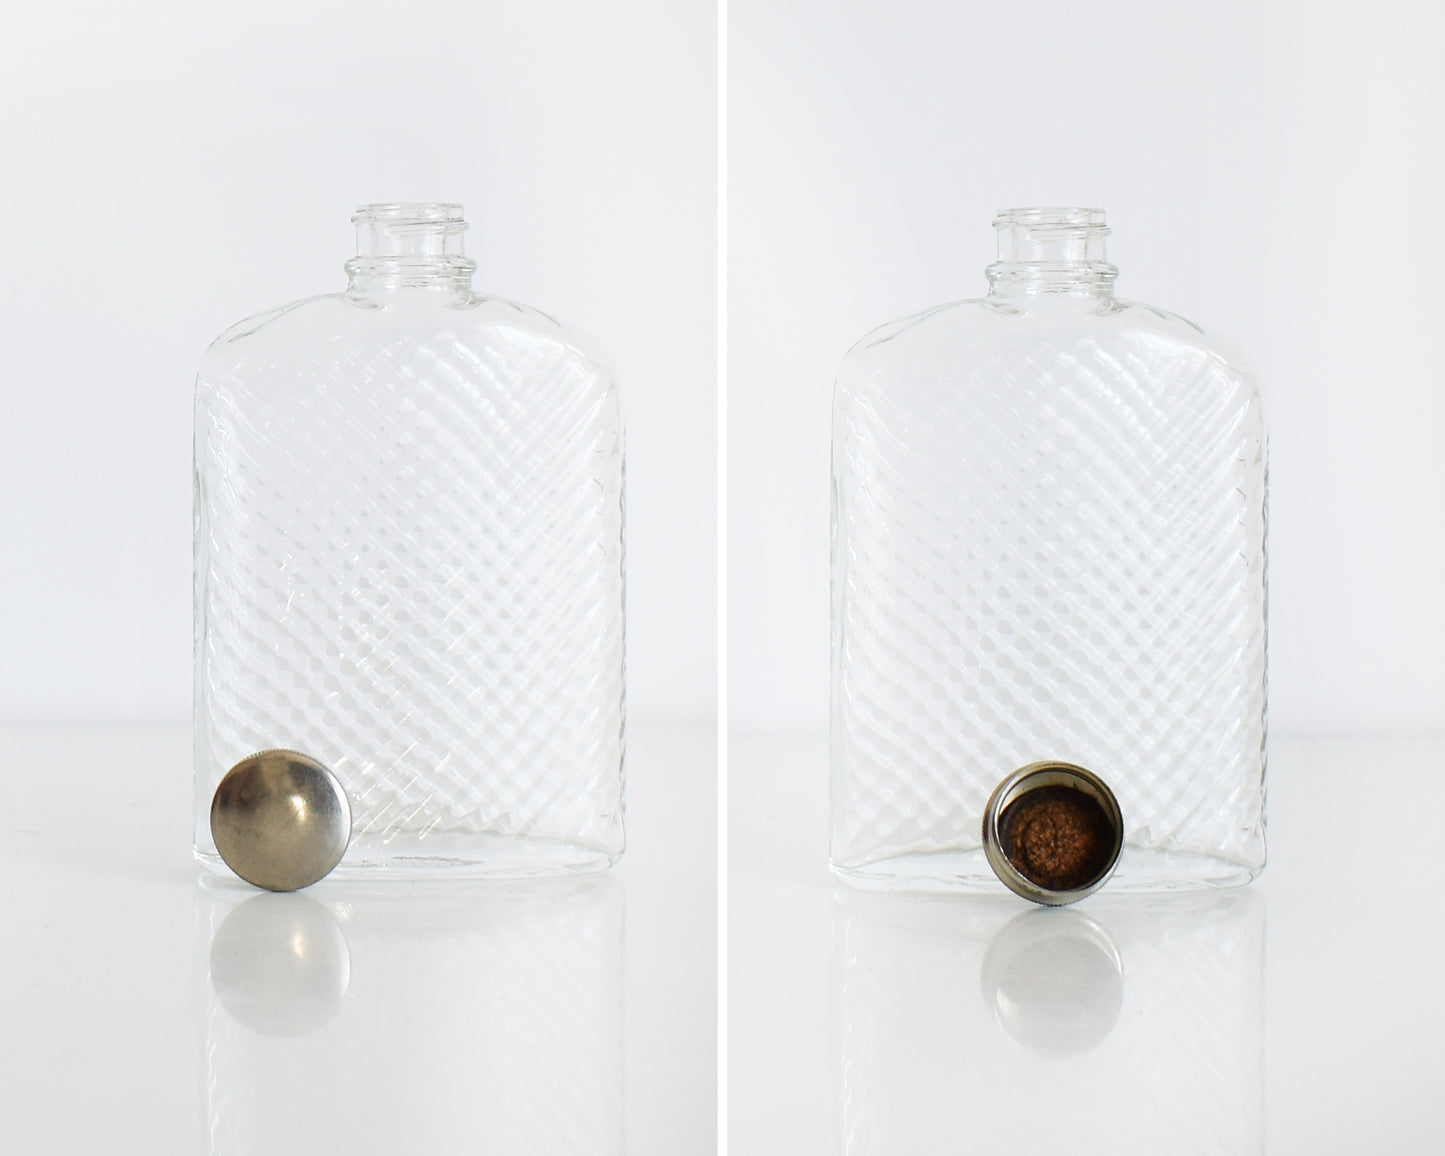 Side by side of the flask with the cap off. The left photo show the top of the cap and the right photo shows the cork inside.